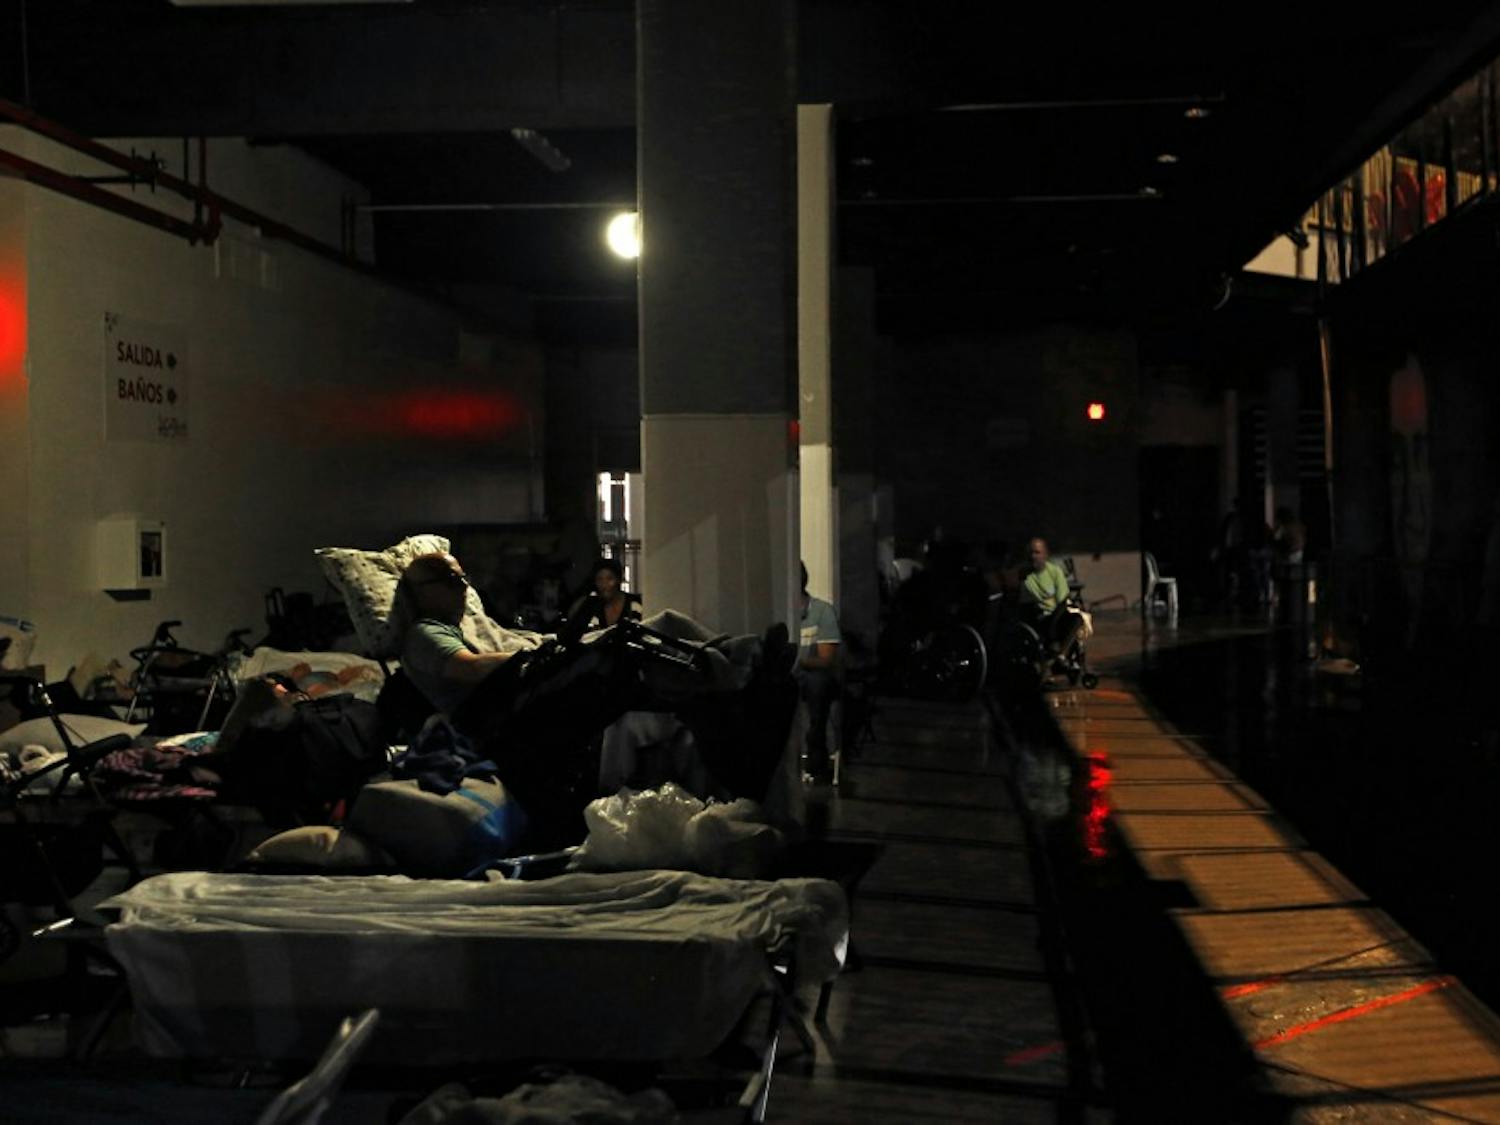 Evacuees rest in almost complete darkness on the ground floor of the Roberto Clemente Coliseum, a major  shelter in San Juan, Puerto Rico, where evacuees were forced to move when the roof began to leak during Hurricane Maria, on Wednesday, Sept. 20, 2017. (Carolyn Cole/Los Angeles Times/TNS) 